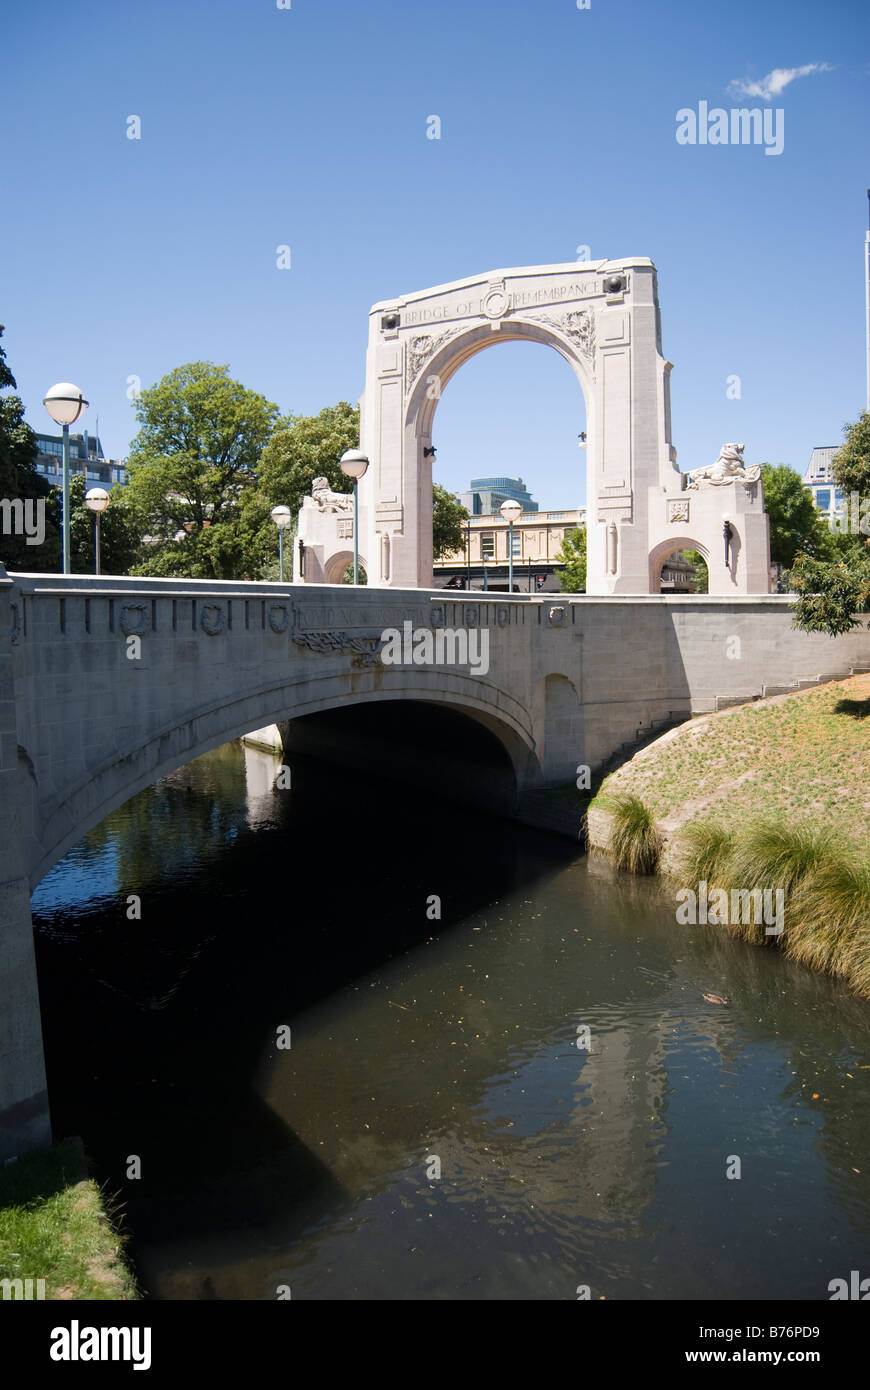 The Bridge of Remembrance, Oxford Terrace, Christchurch, Canterbury, New Zealand Stock Photo